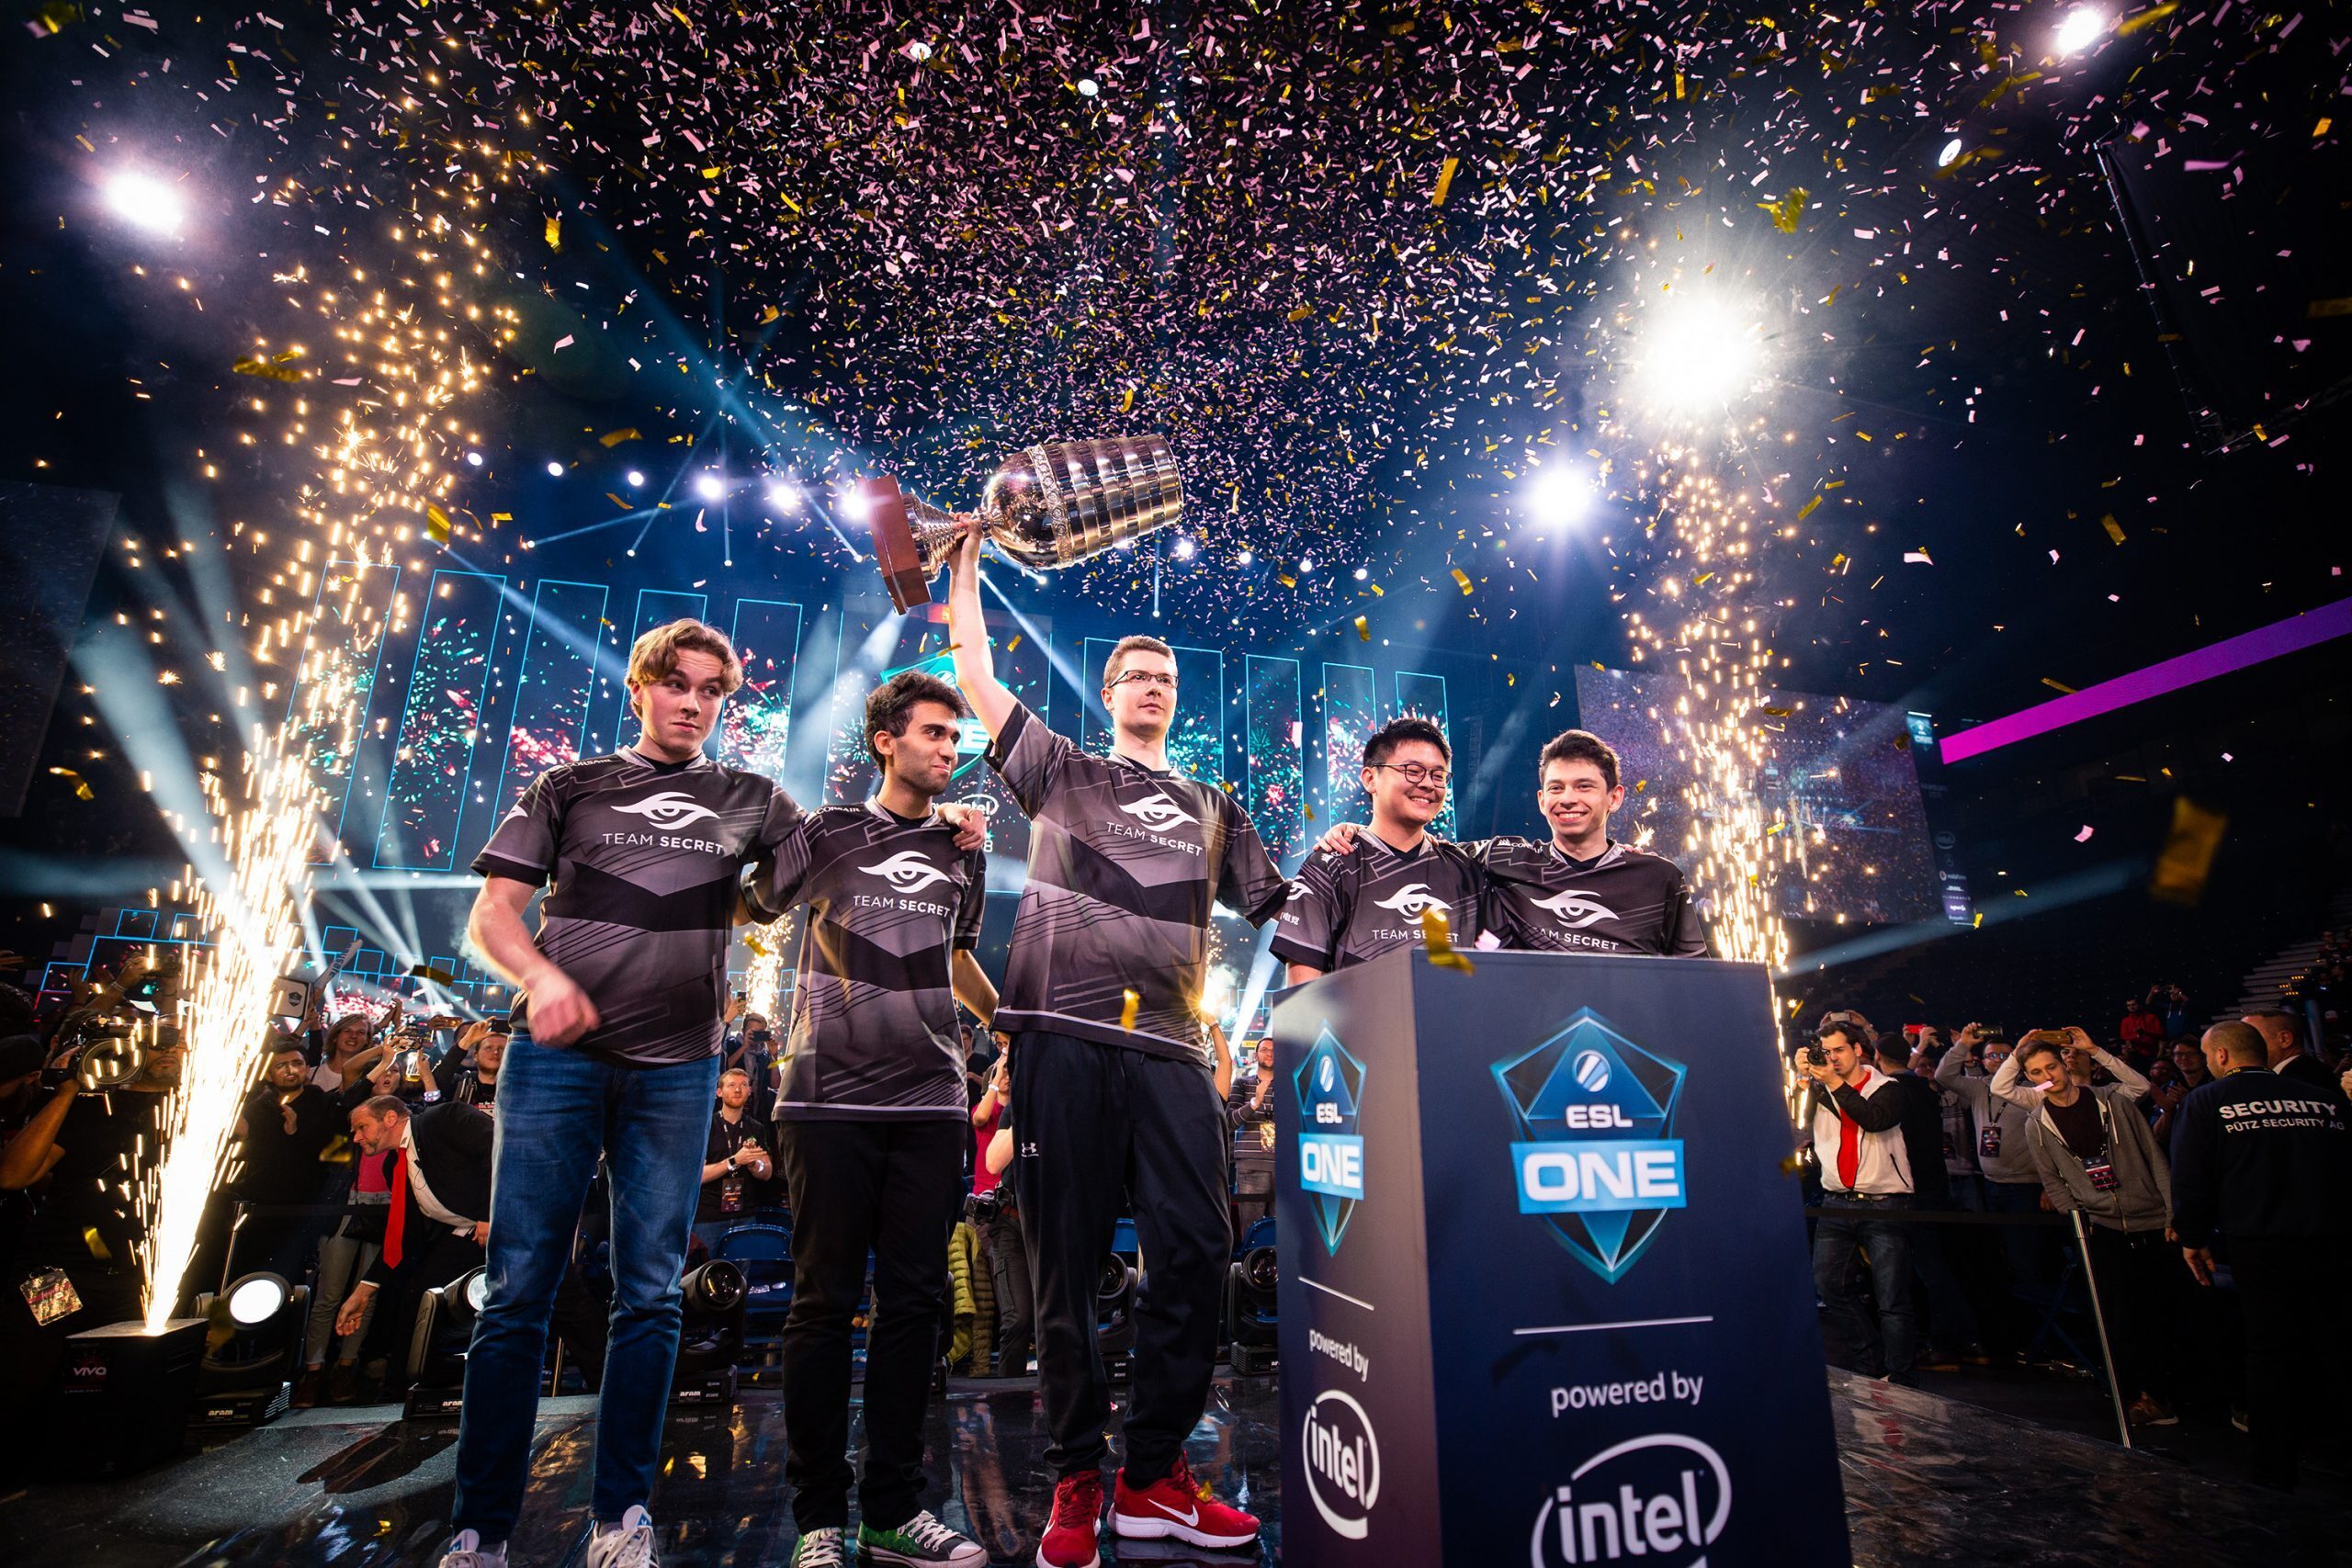 After a back-and-forth Grand Finals, Team Secret came away with the win at ESL One Hamburg (Copyright: ESL